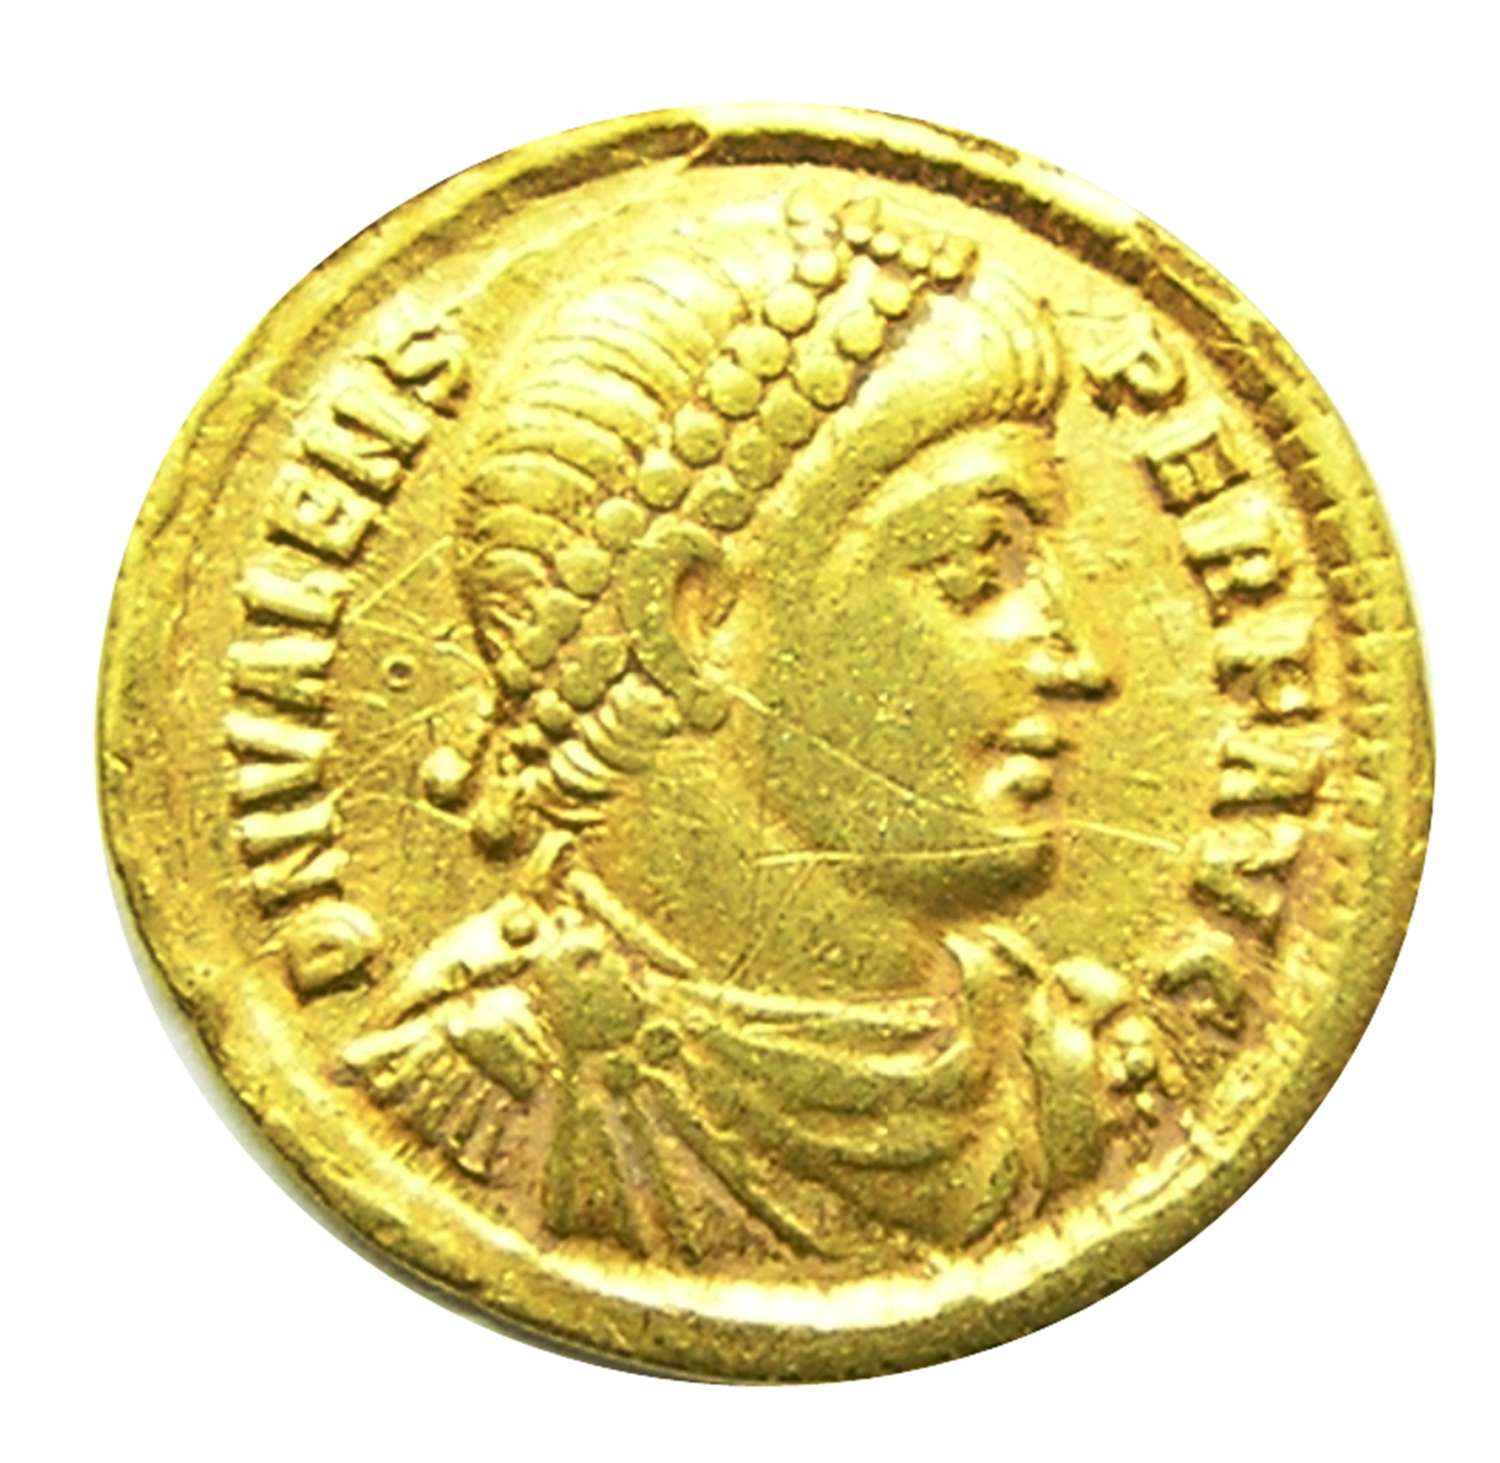 Roman Gold Solidus of Emperor Valens minted in Antioch